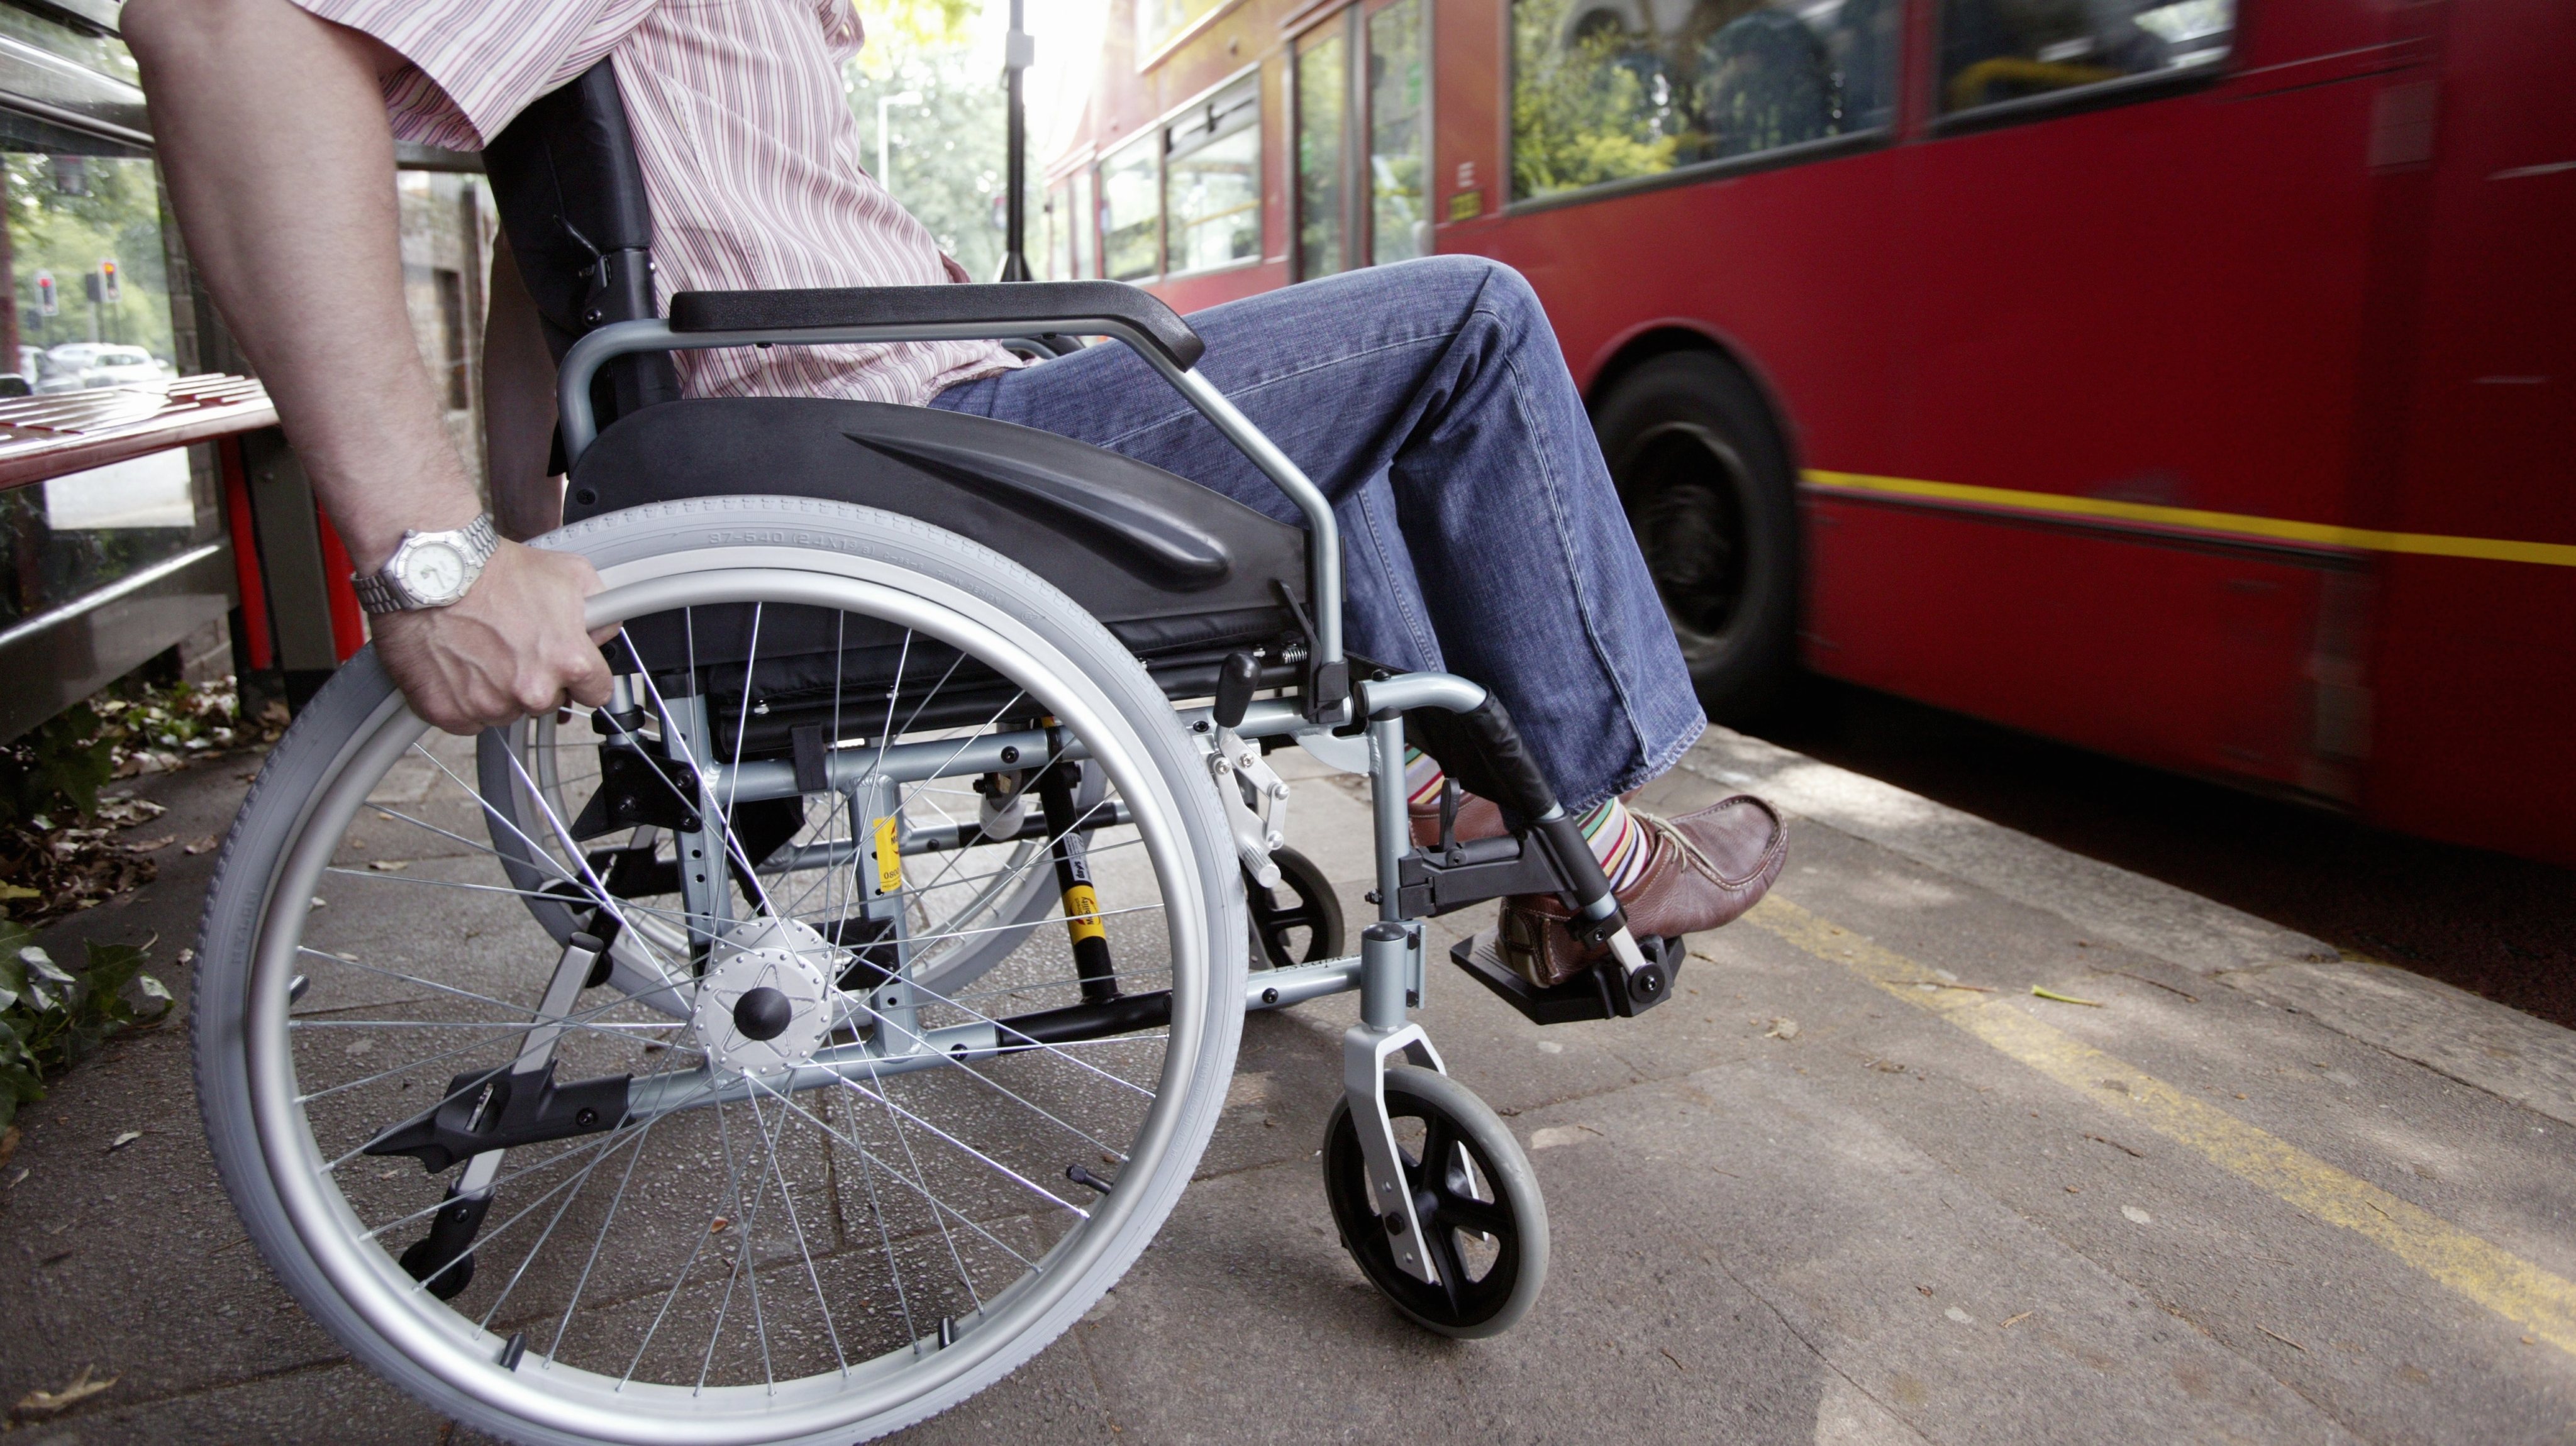 England, London, Disabled man in wheelchair at bus stop